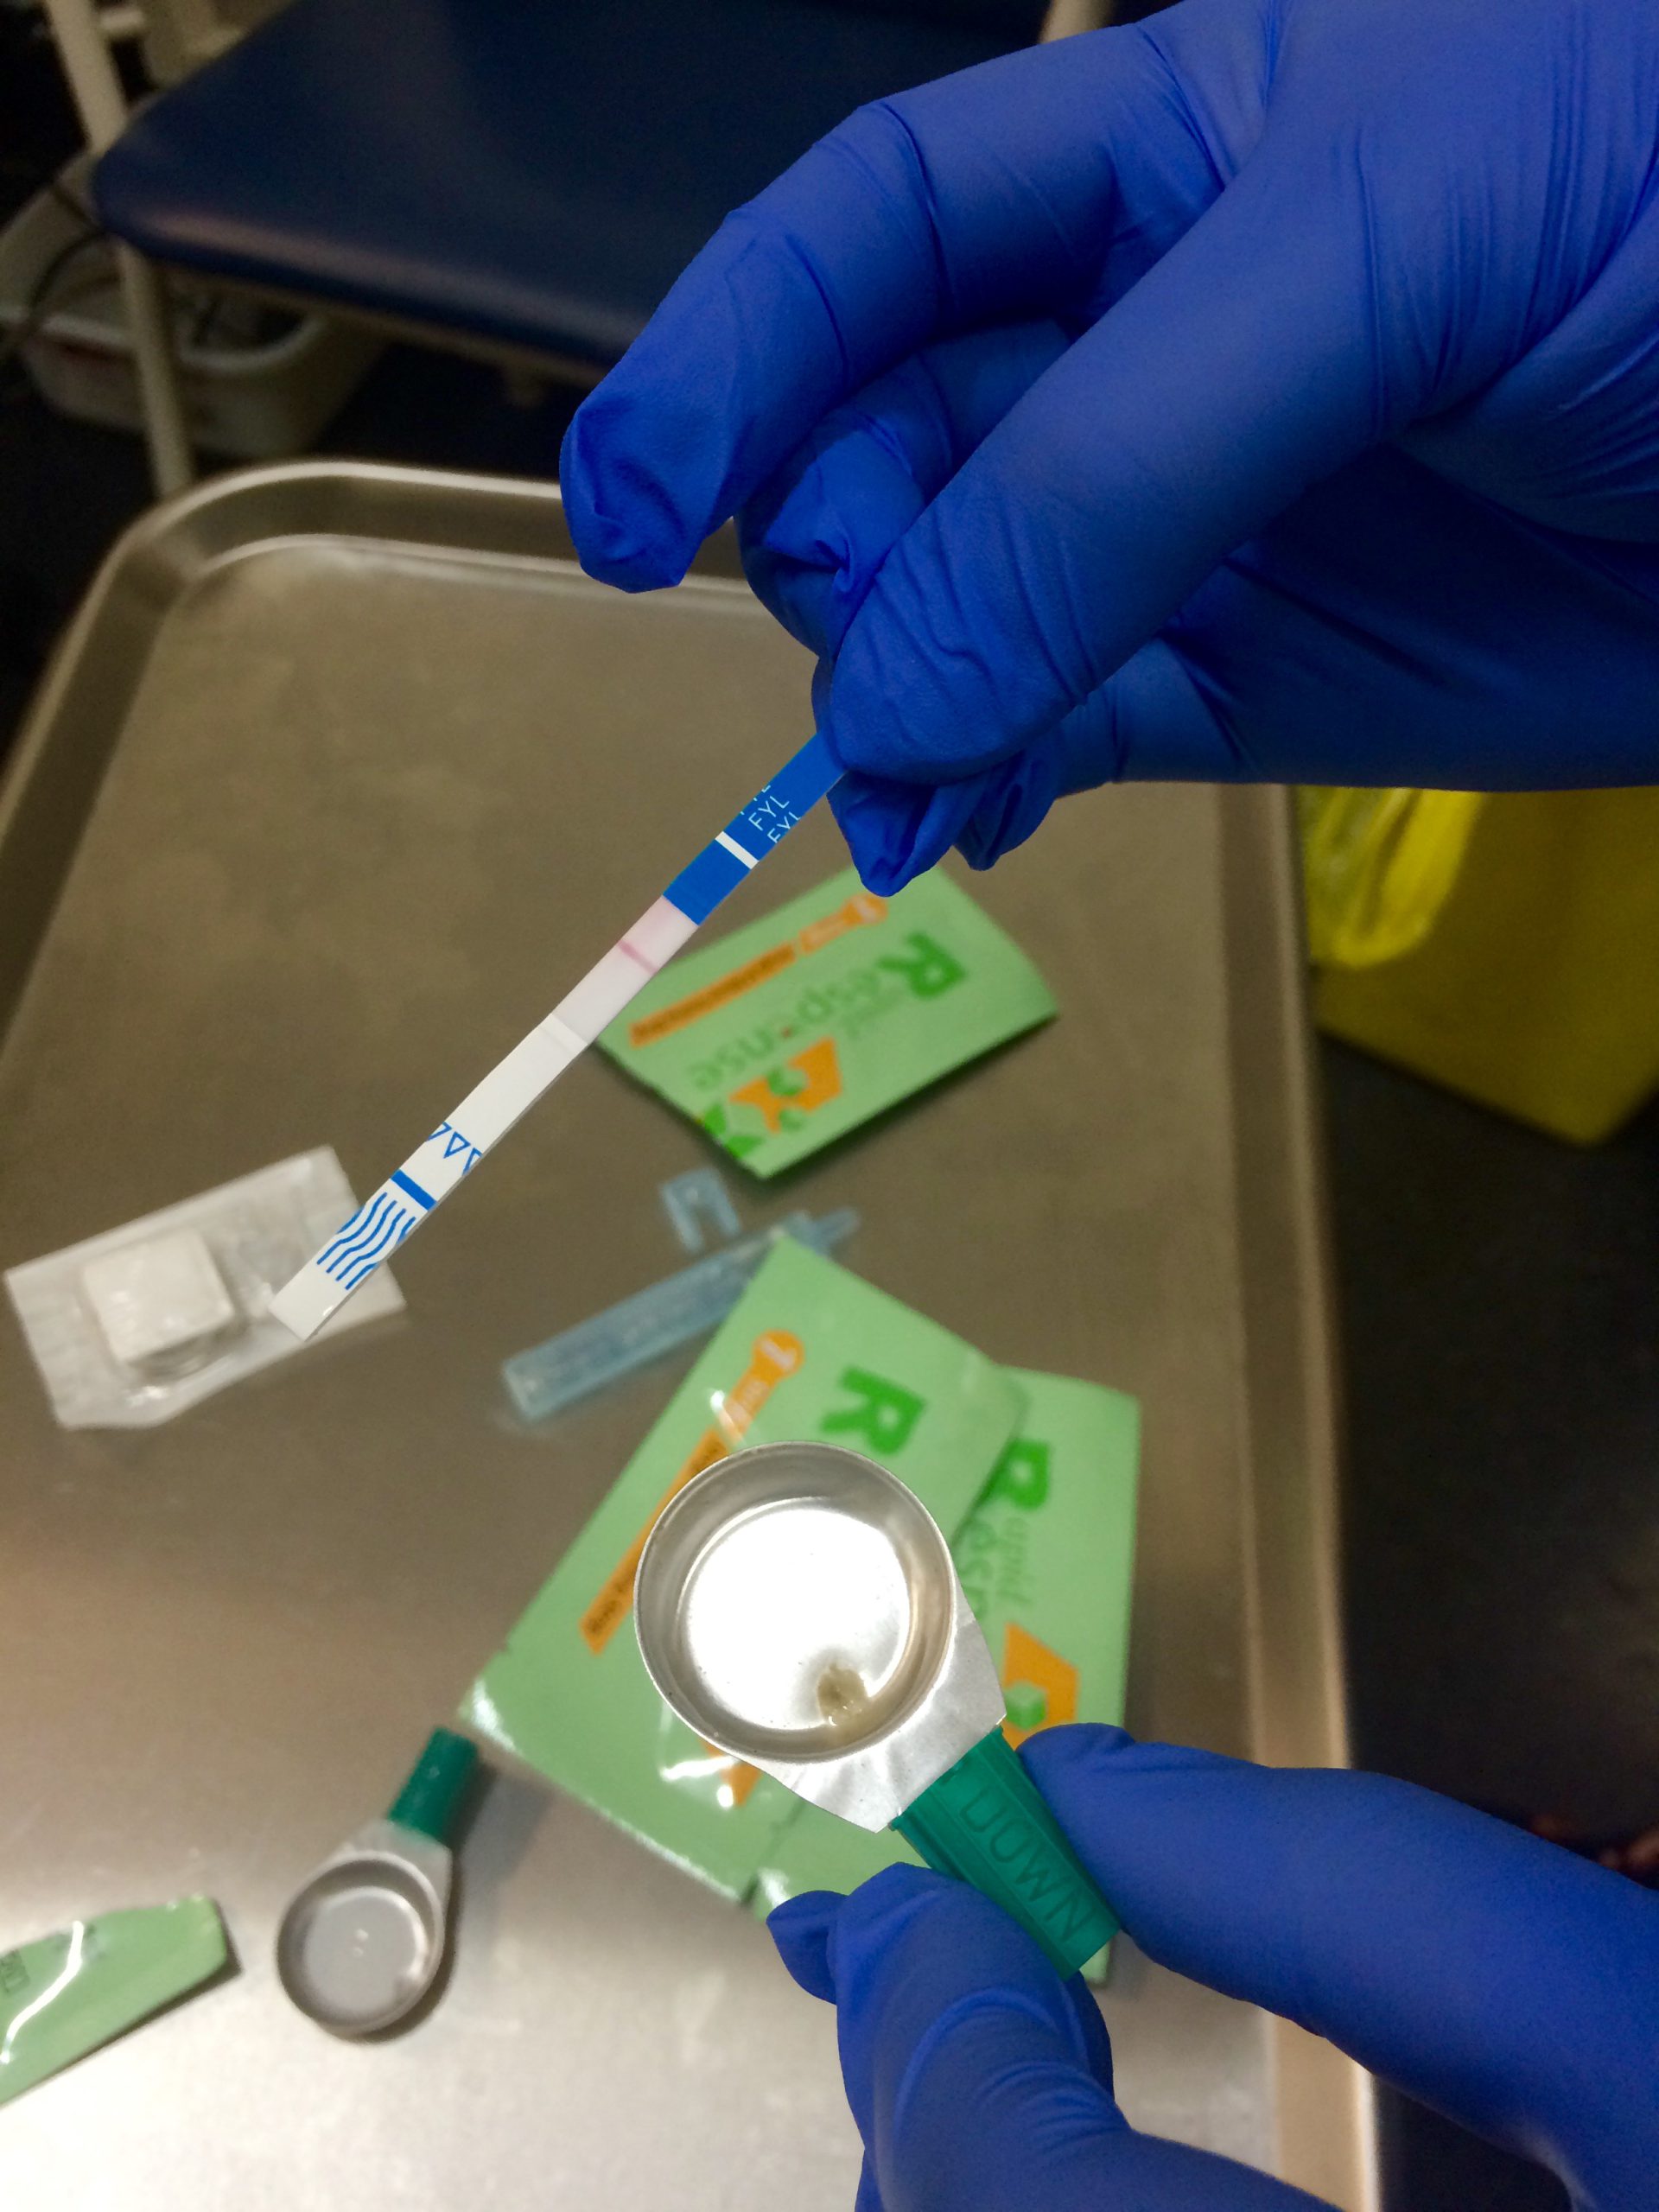 Take-home drug test strips another tool to prevent fentanyl overdoses